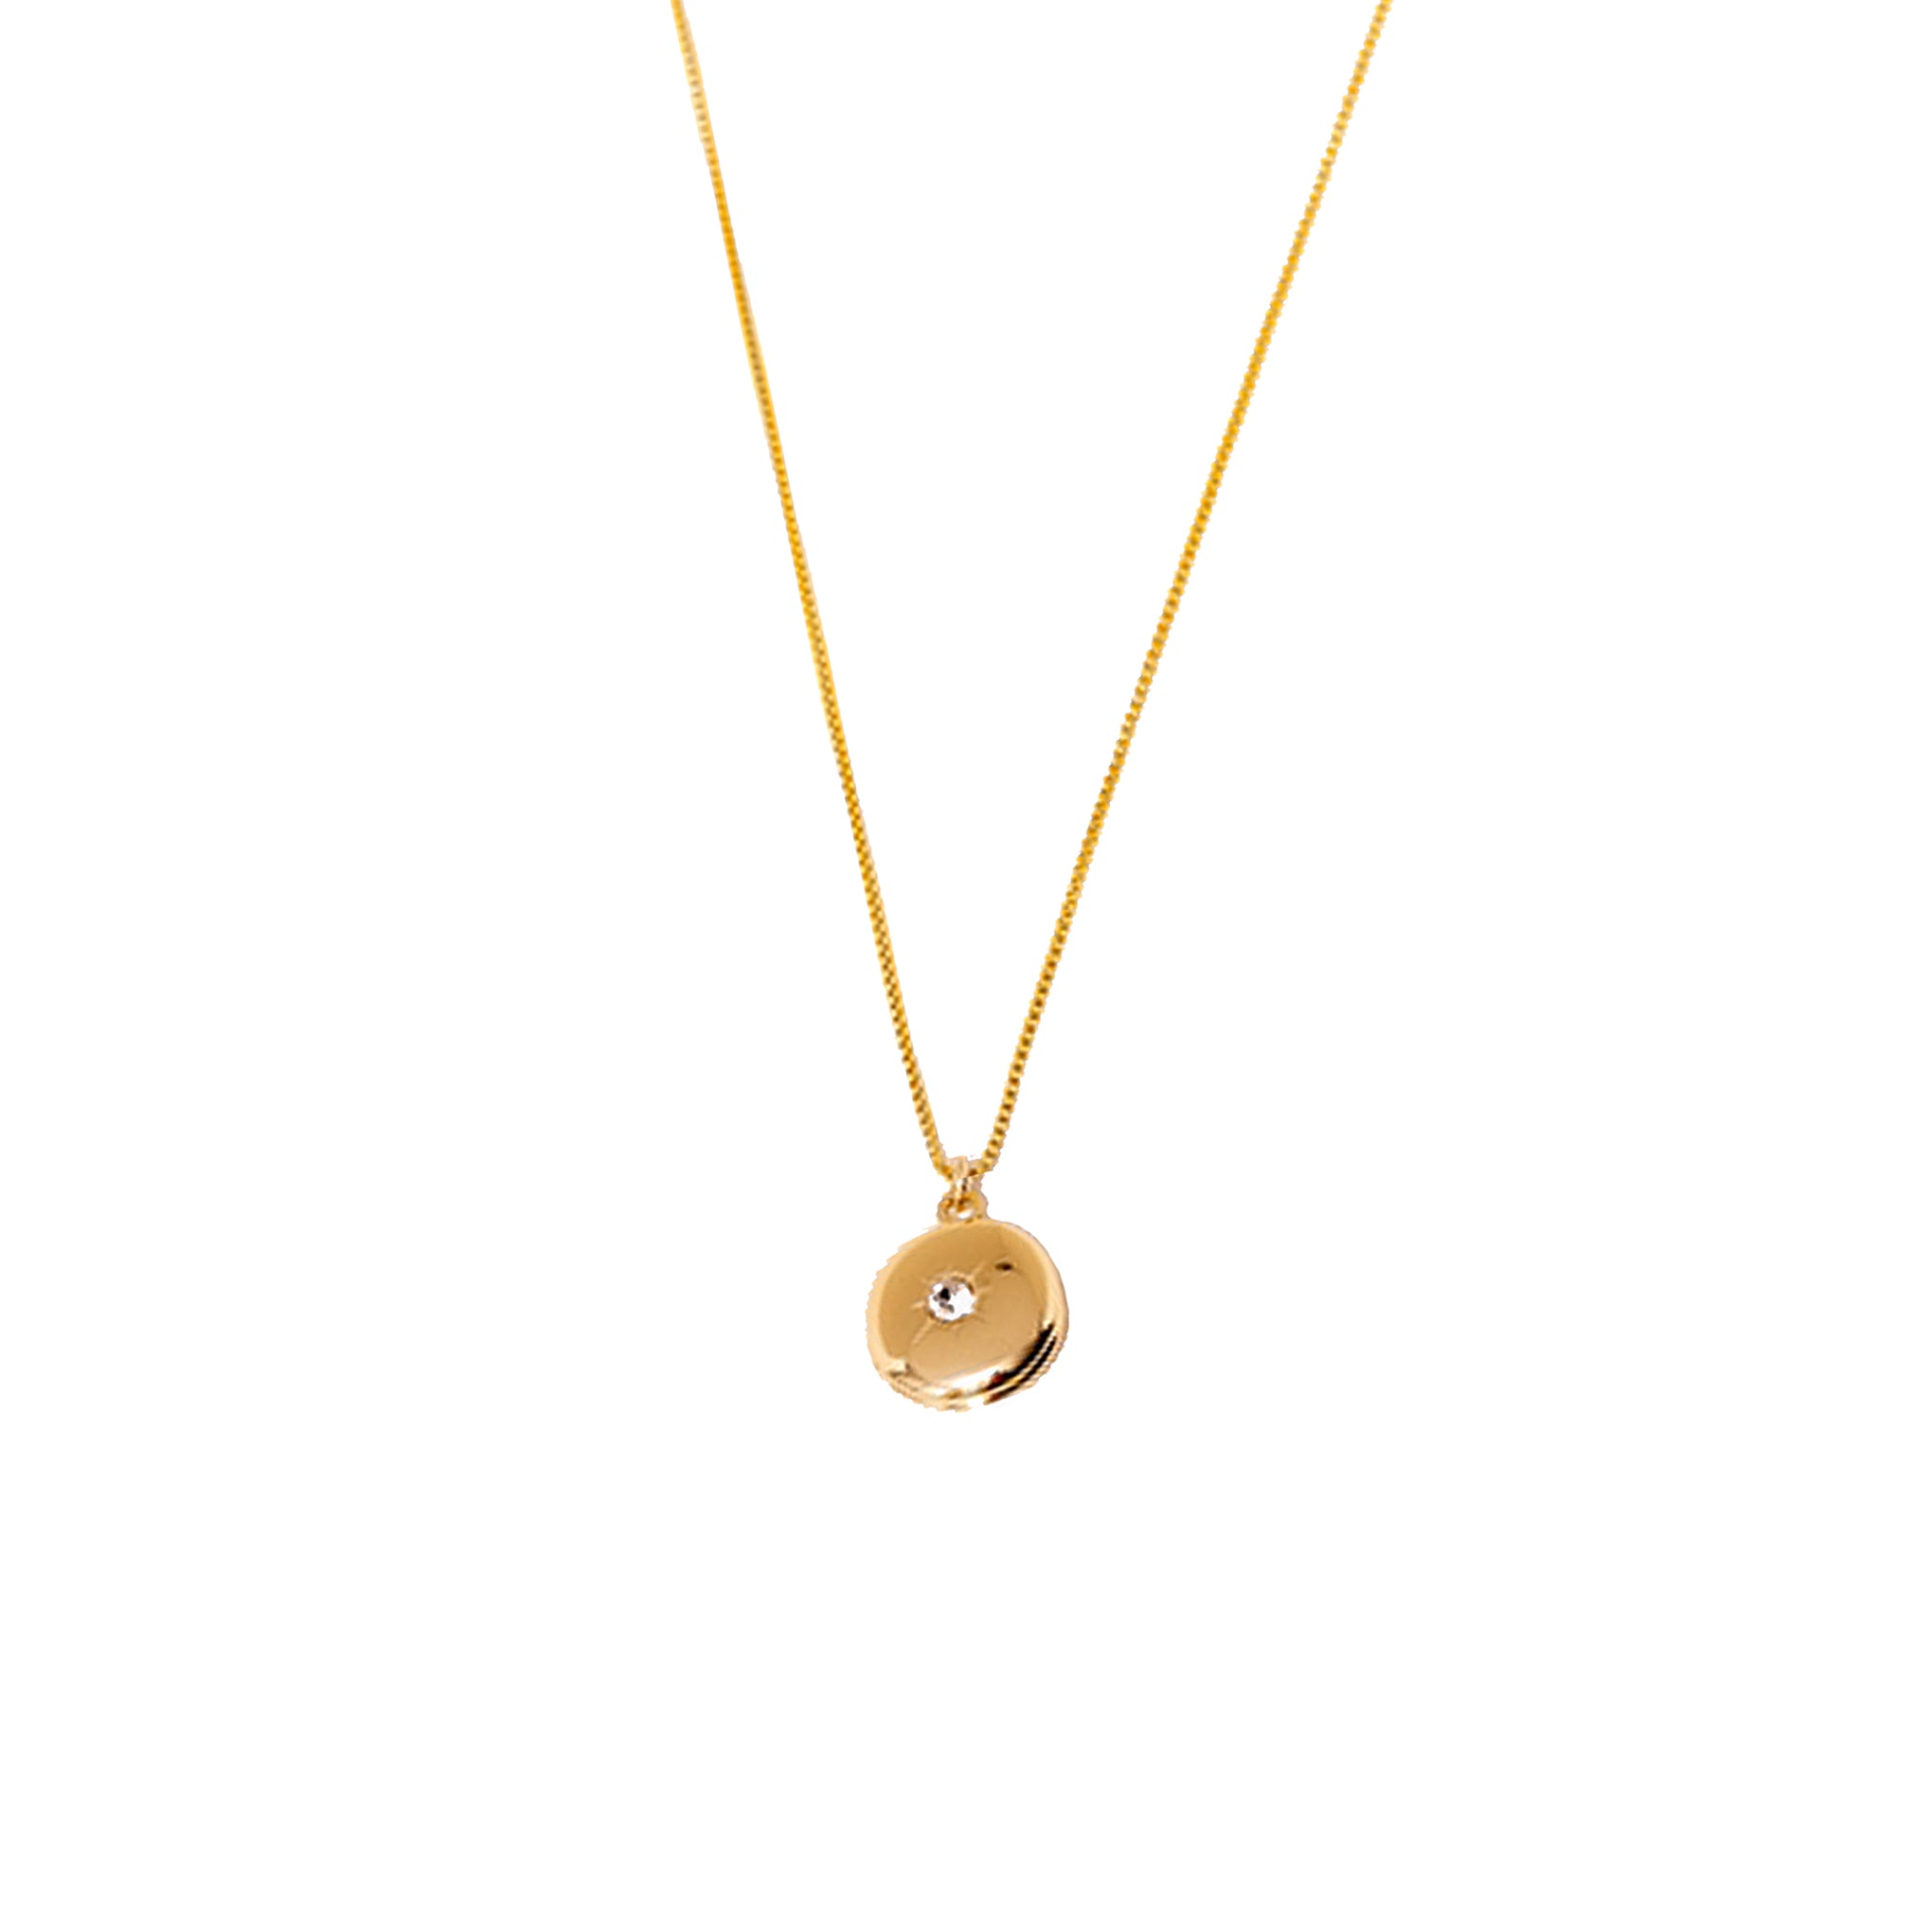 Larissa Loden Circular Locket Charm Pendant Necklace in Gold Plated with Decorative Stone